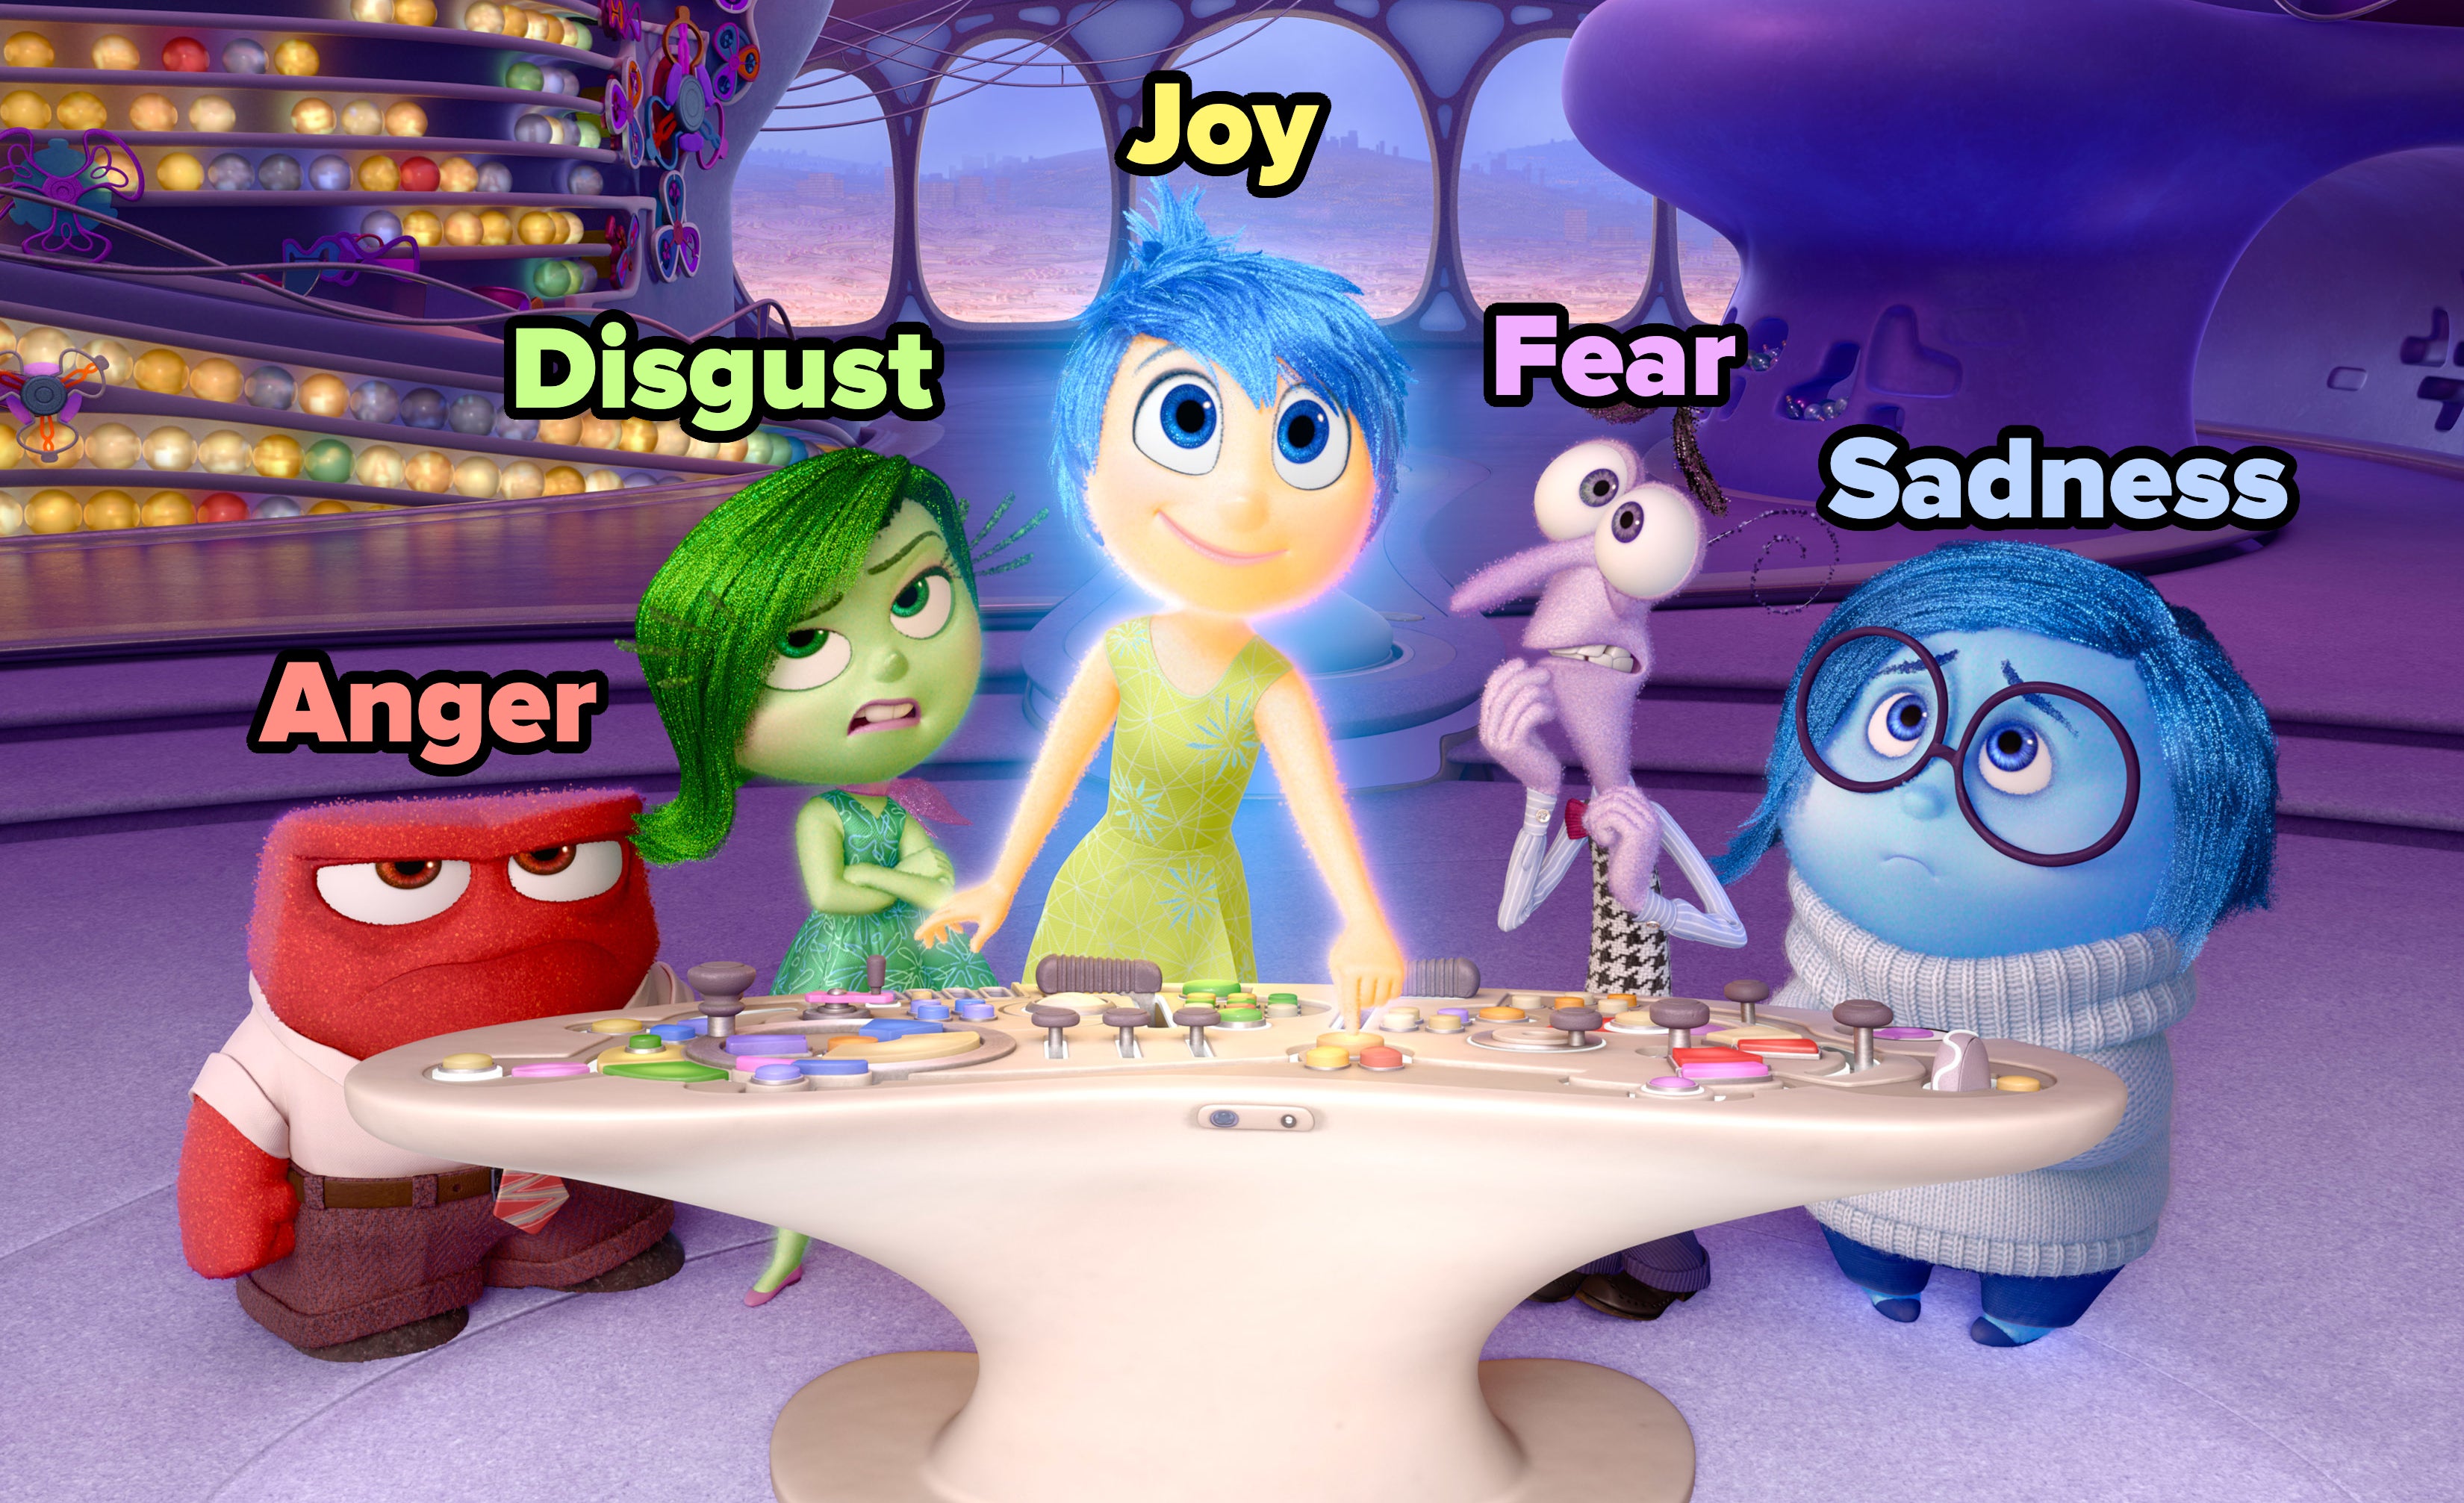 Animated characters from &#x27;Inside Out&#x27; with Joy, Anger, Disgust, Fear, and Sadness around a control console